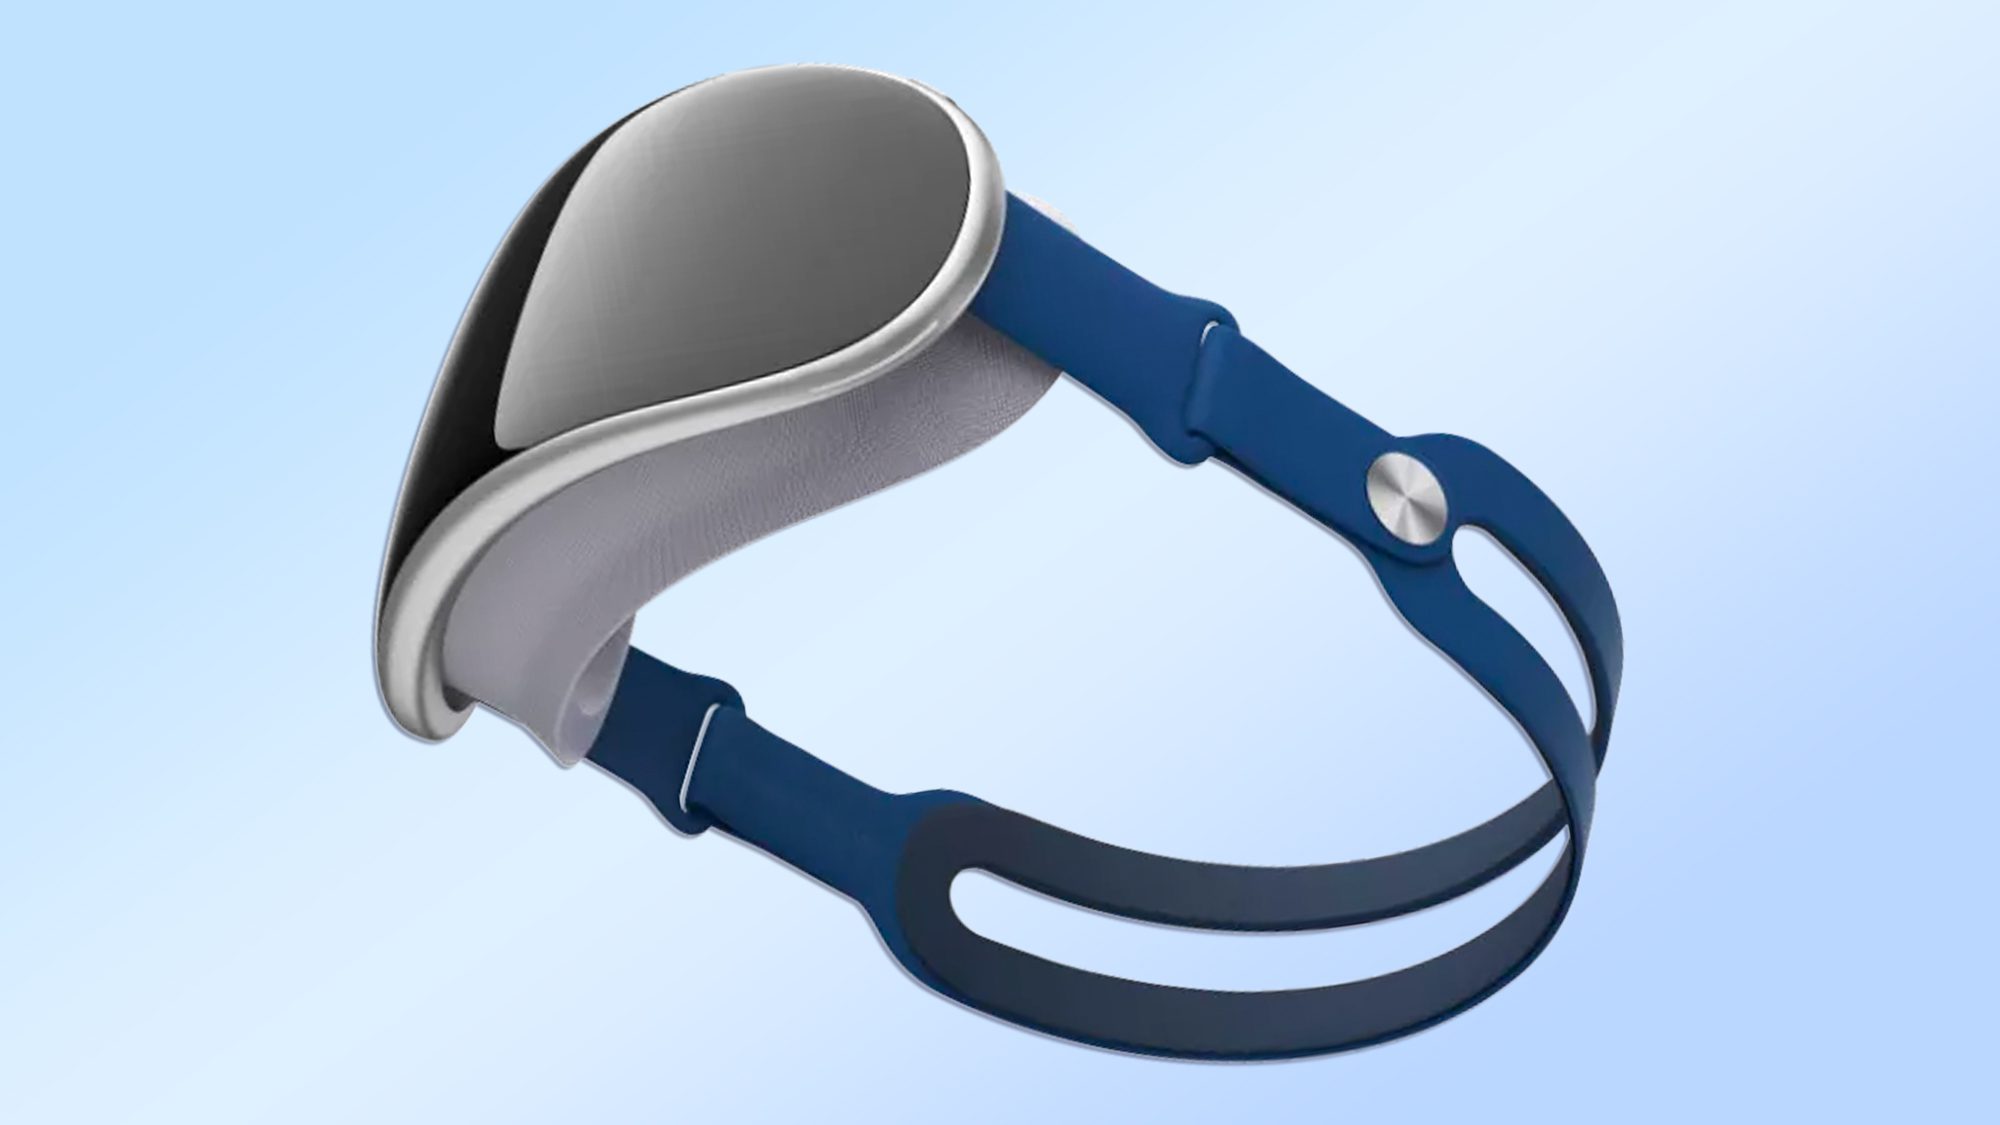 Rendern von Apple-Mixed-Reality-Headsets